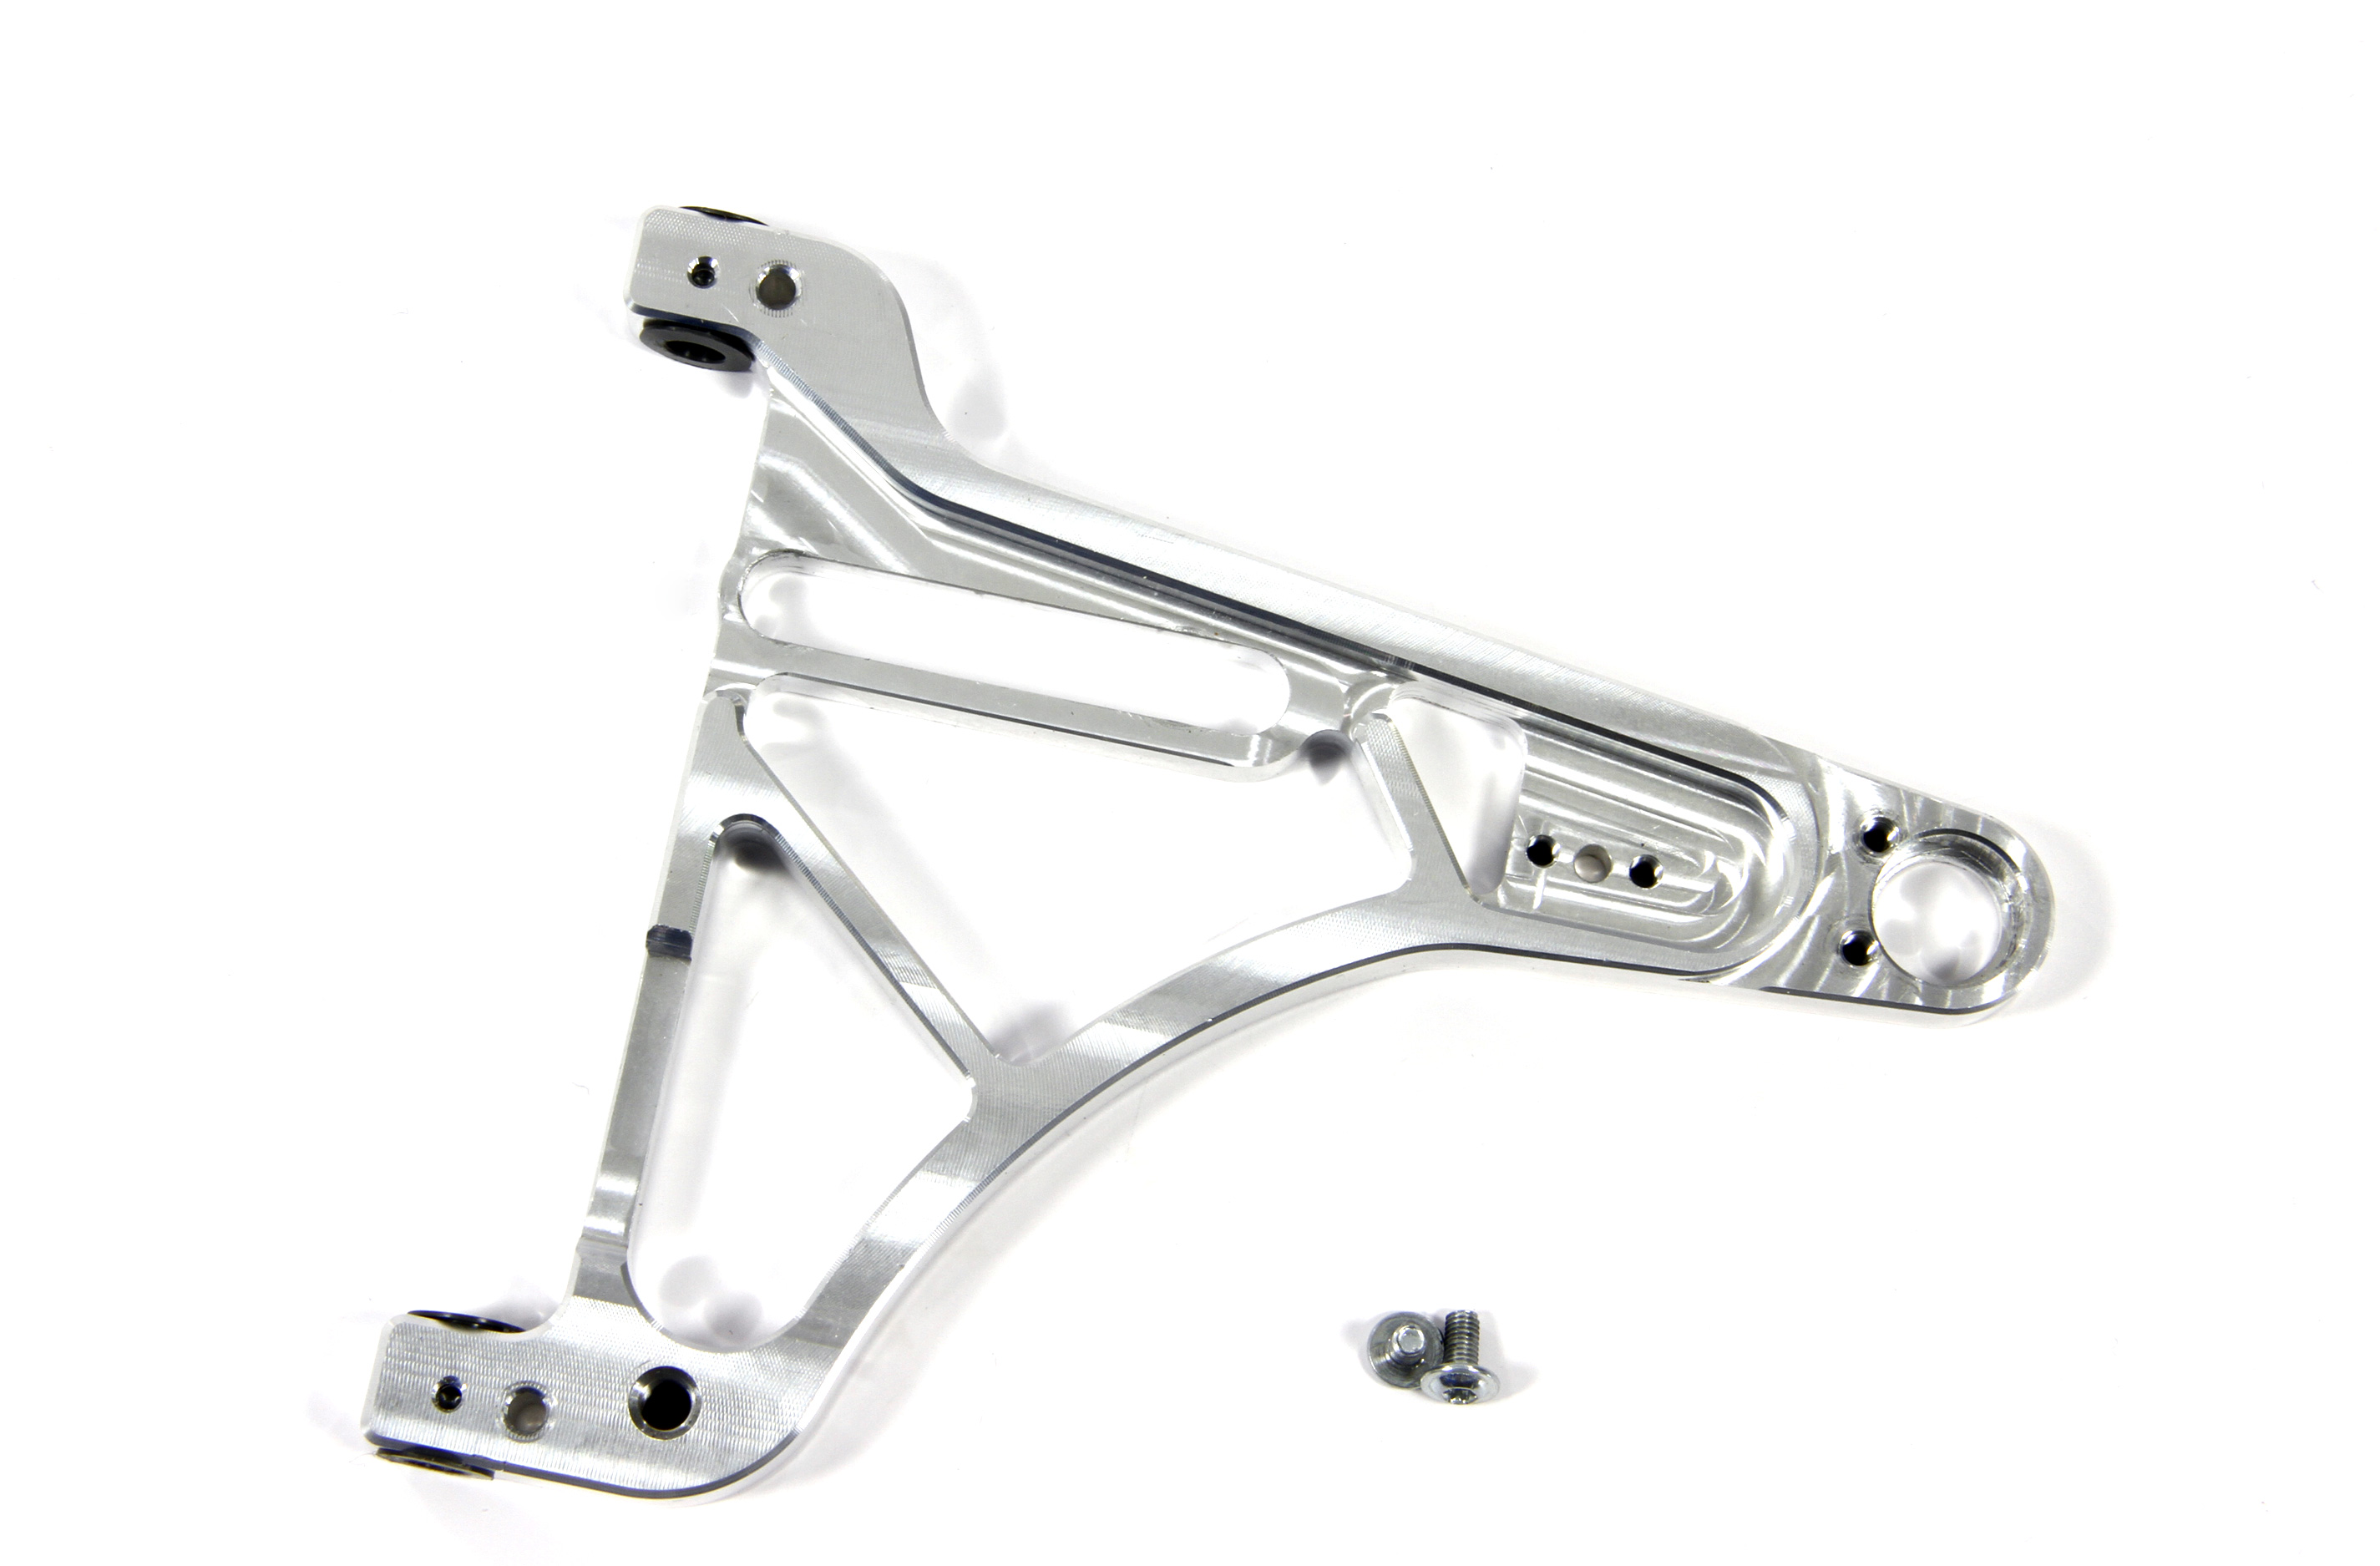 1103/02 FG Right lower front arm for Evo 2020